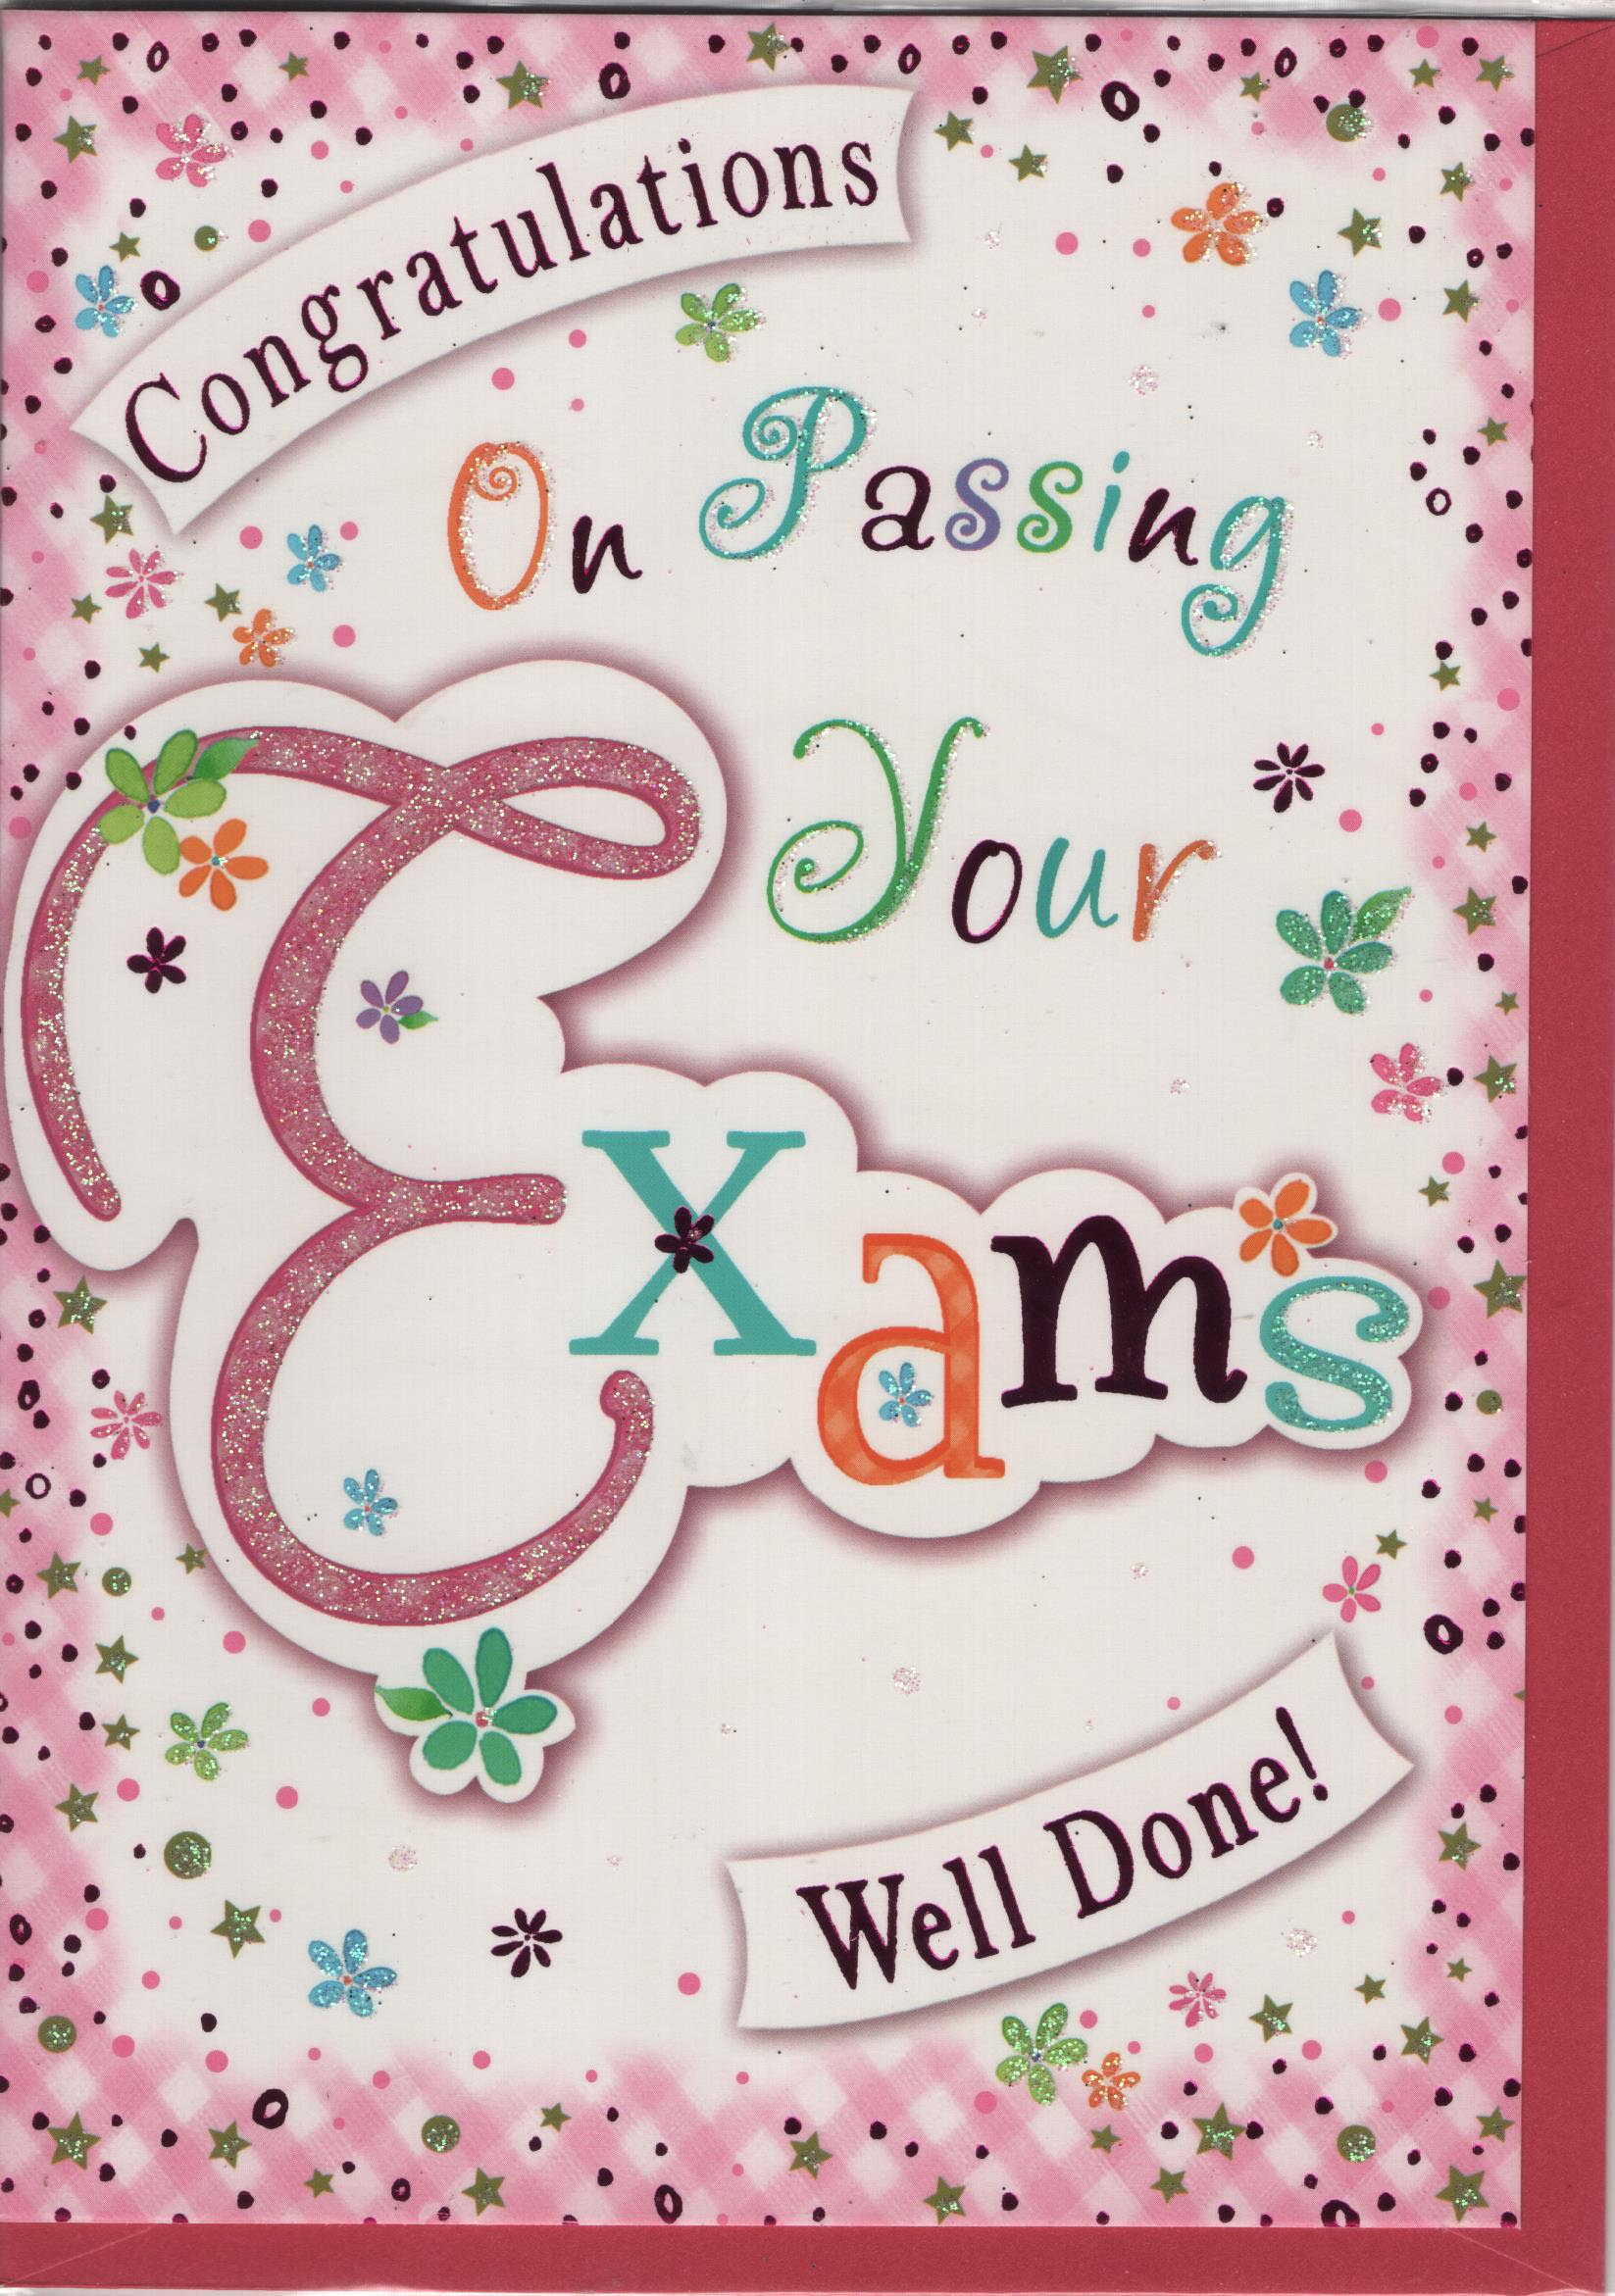 Congratulations on Passing Your Exams Well Done!